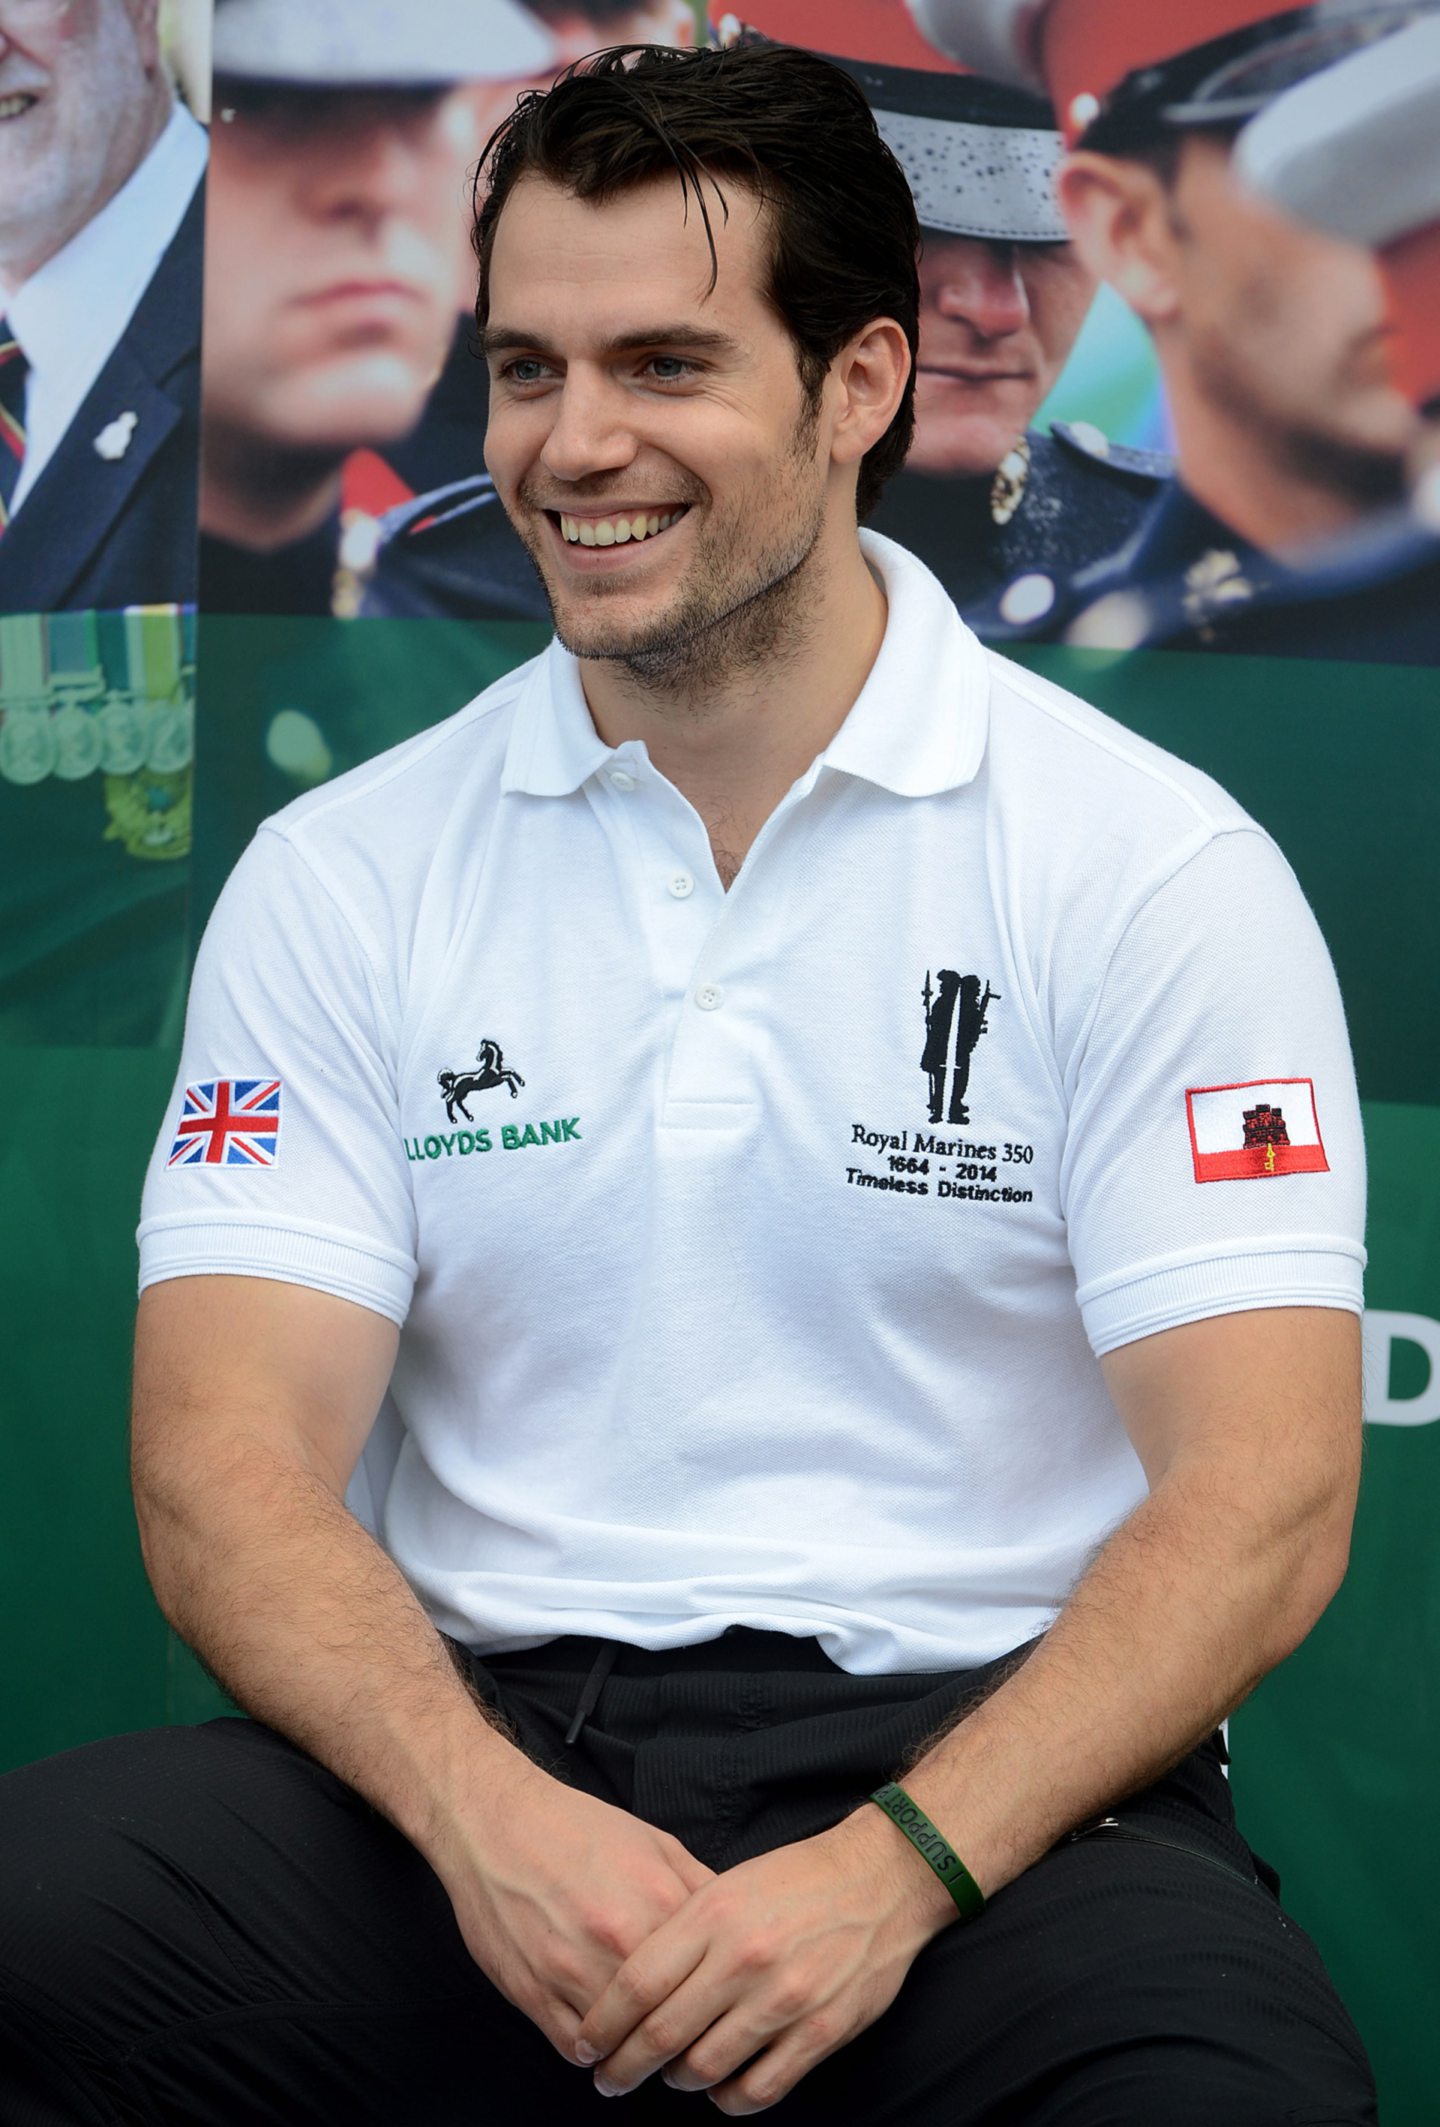 Superman actor Henry Cavill has been a staunch supporter of the Royal Marines Charity. Image: Royal Navy.